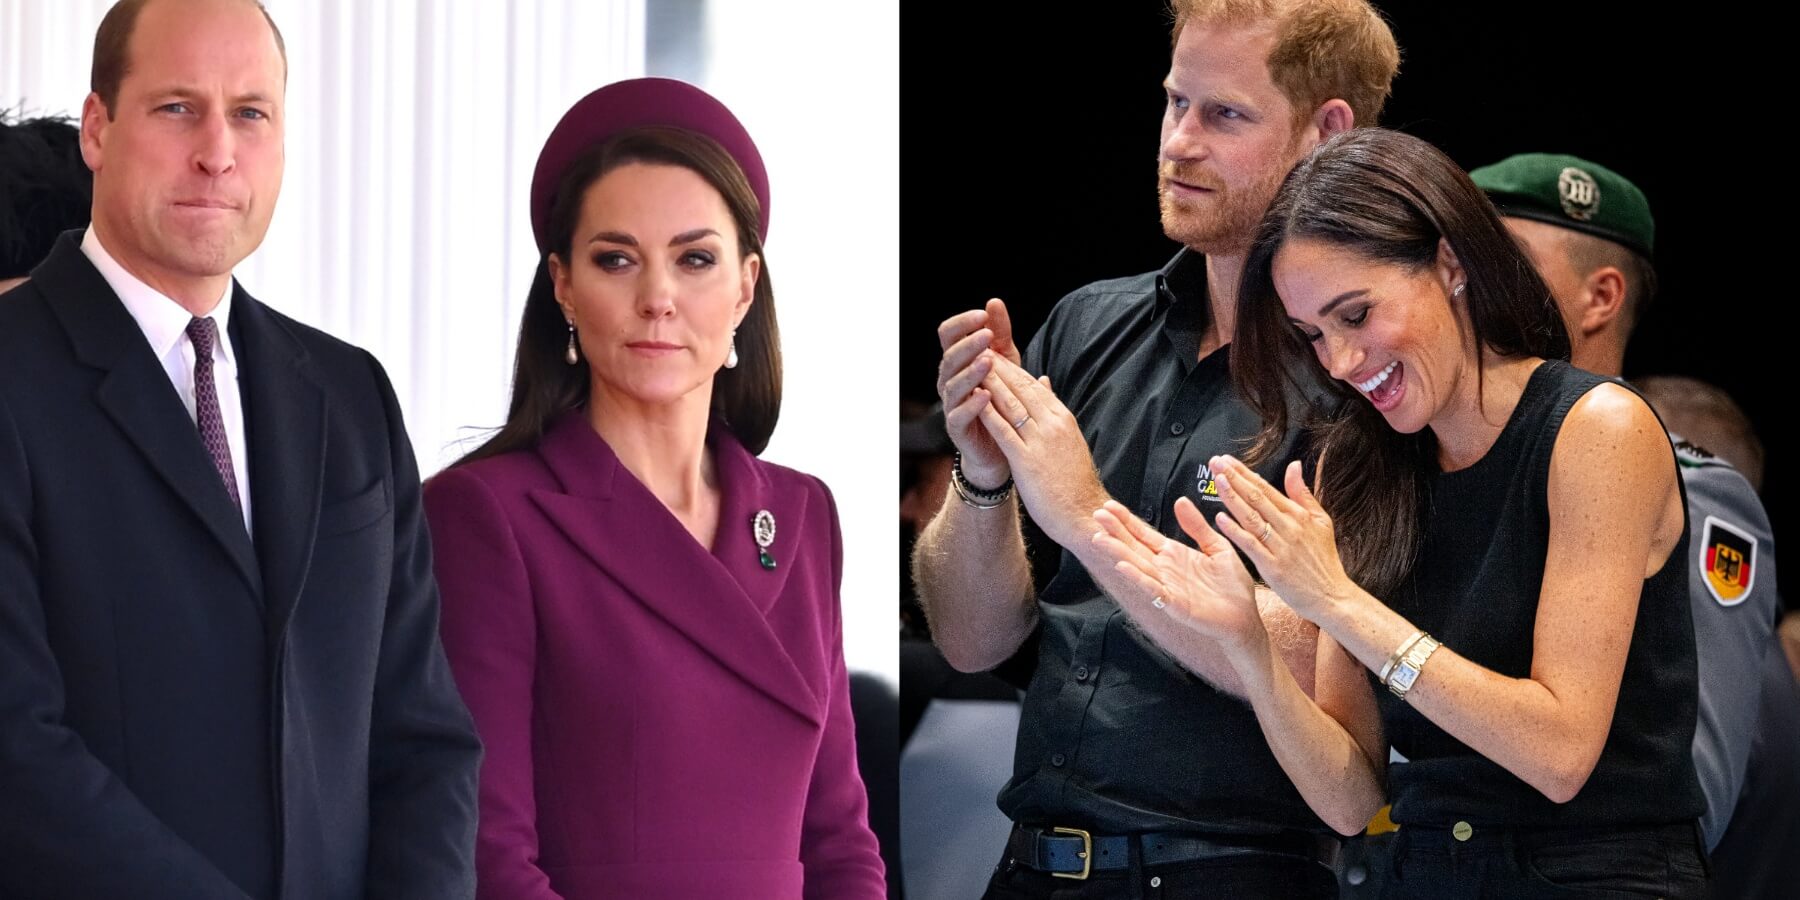 Prince William and Kate Middleton in a side-by-side photo alongside Prince Harry and Meghan Markle.